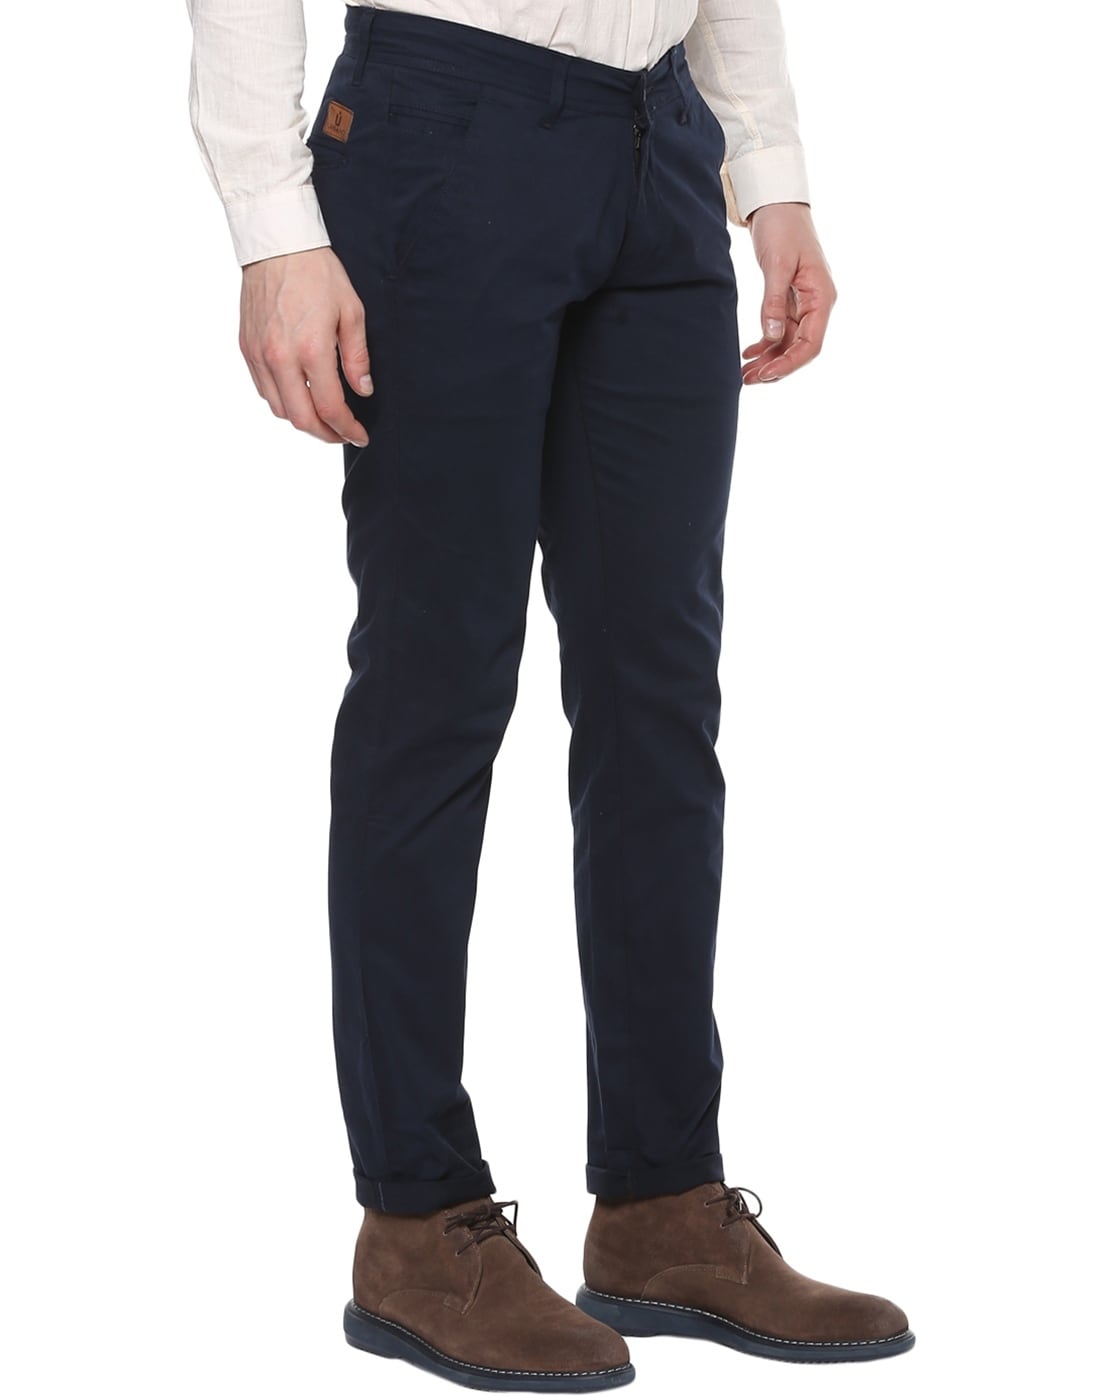 Navy Blue Chinos  Shop for Navy Blue Chinos Online  Myntra